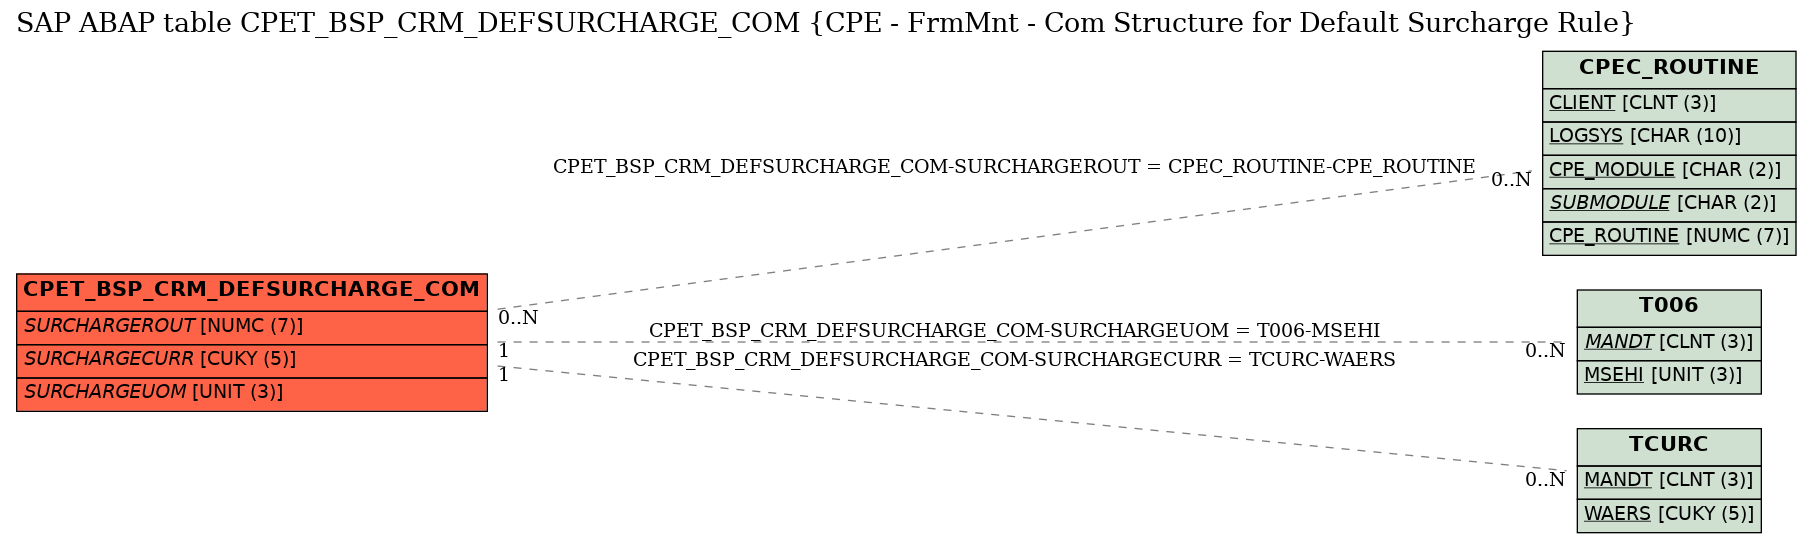 E-R Diagram for table CPET_BSP_CRM_DEFSURCHARGE_COM (CPE - FrmMnt - Com Structure for Default Surcharge Rule)